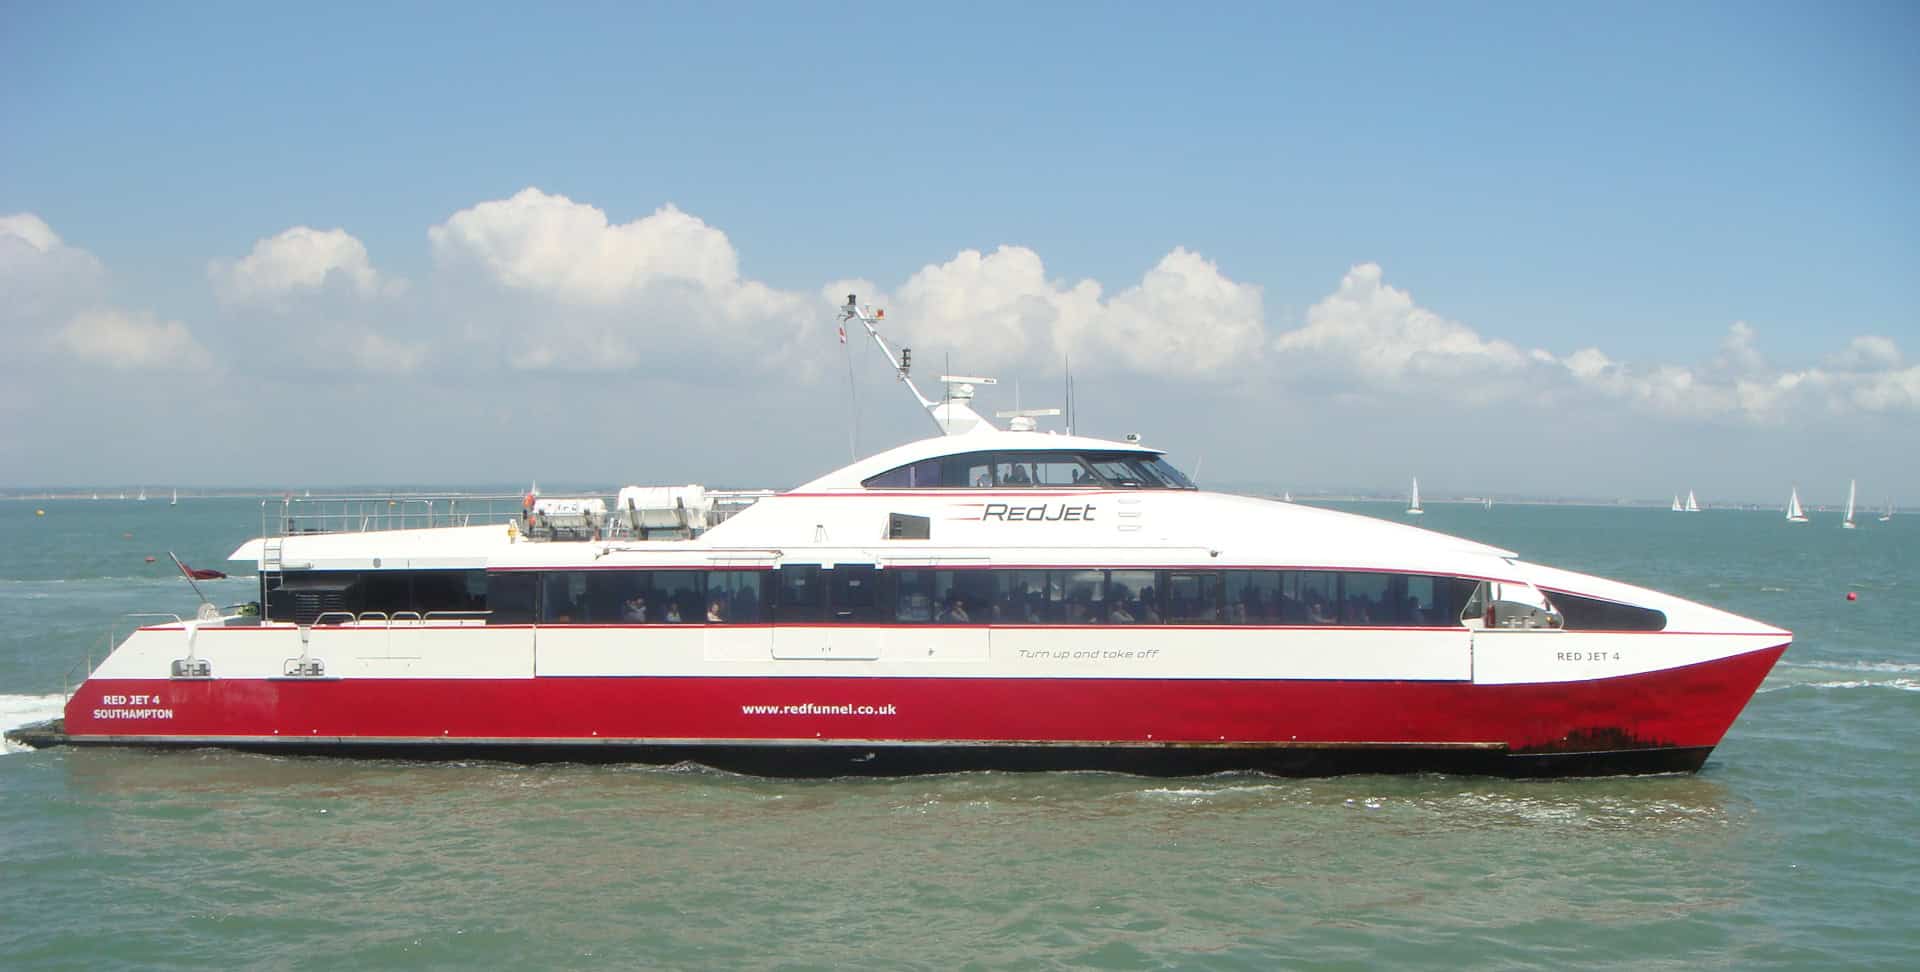 Red Jet 4 on the Solent